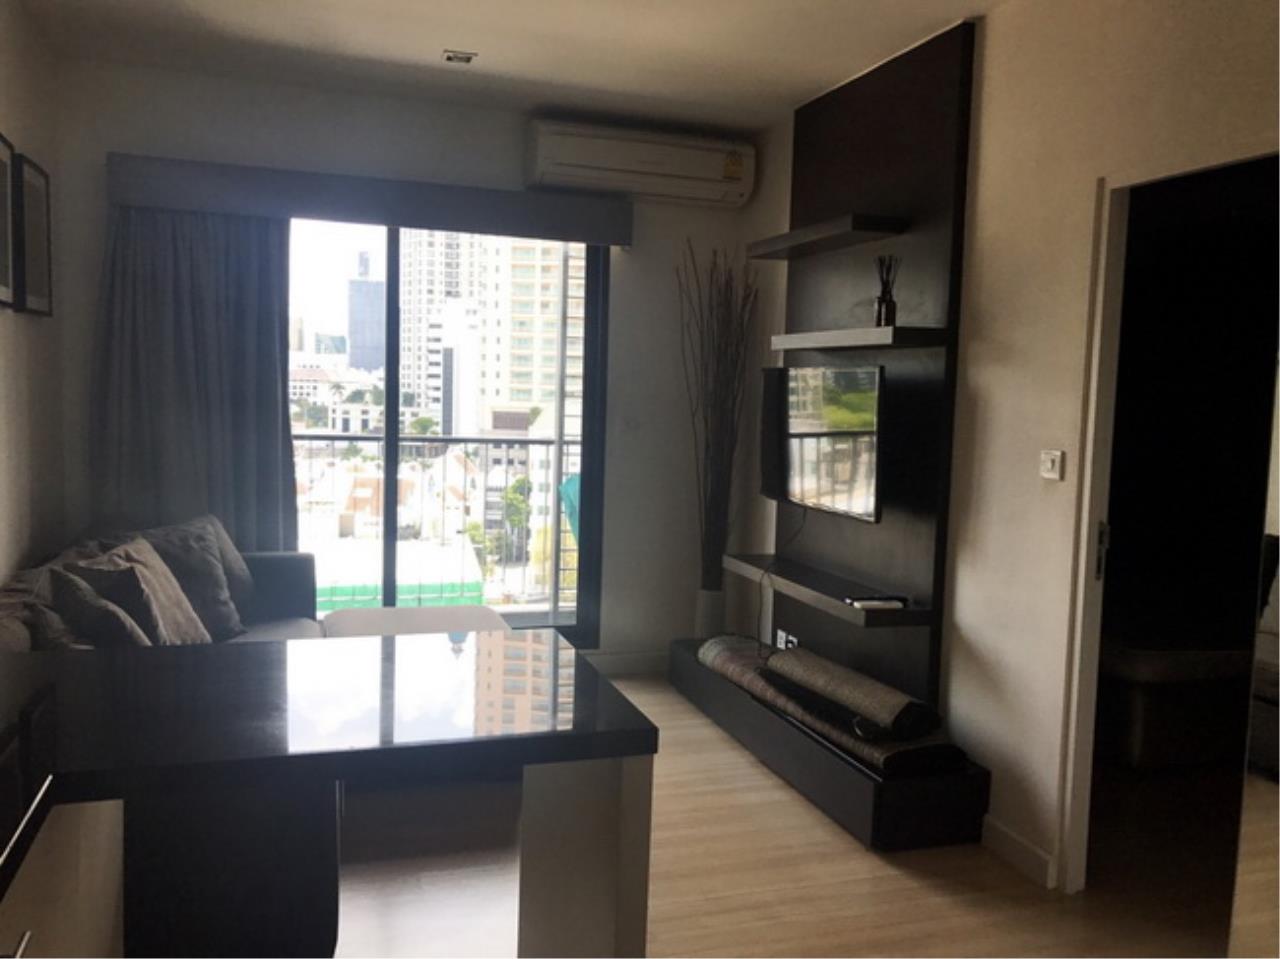 Forbest Properties Agency's 38159 - The Seed Mingle, Condominium for rent, Sathorn Road, area 43 sq.m. 7